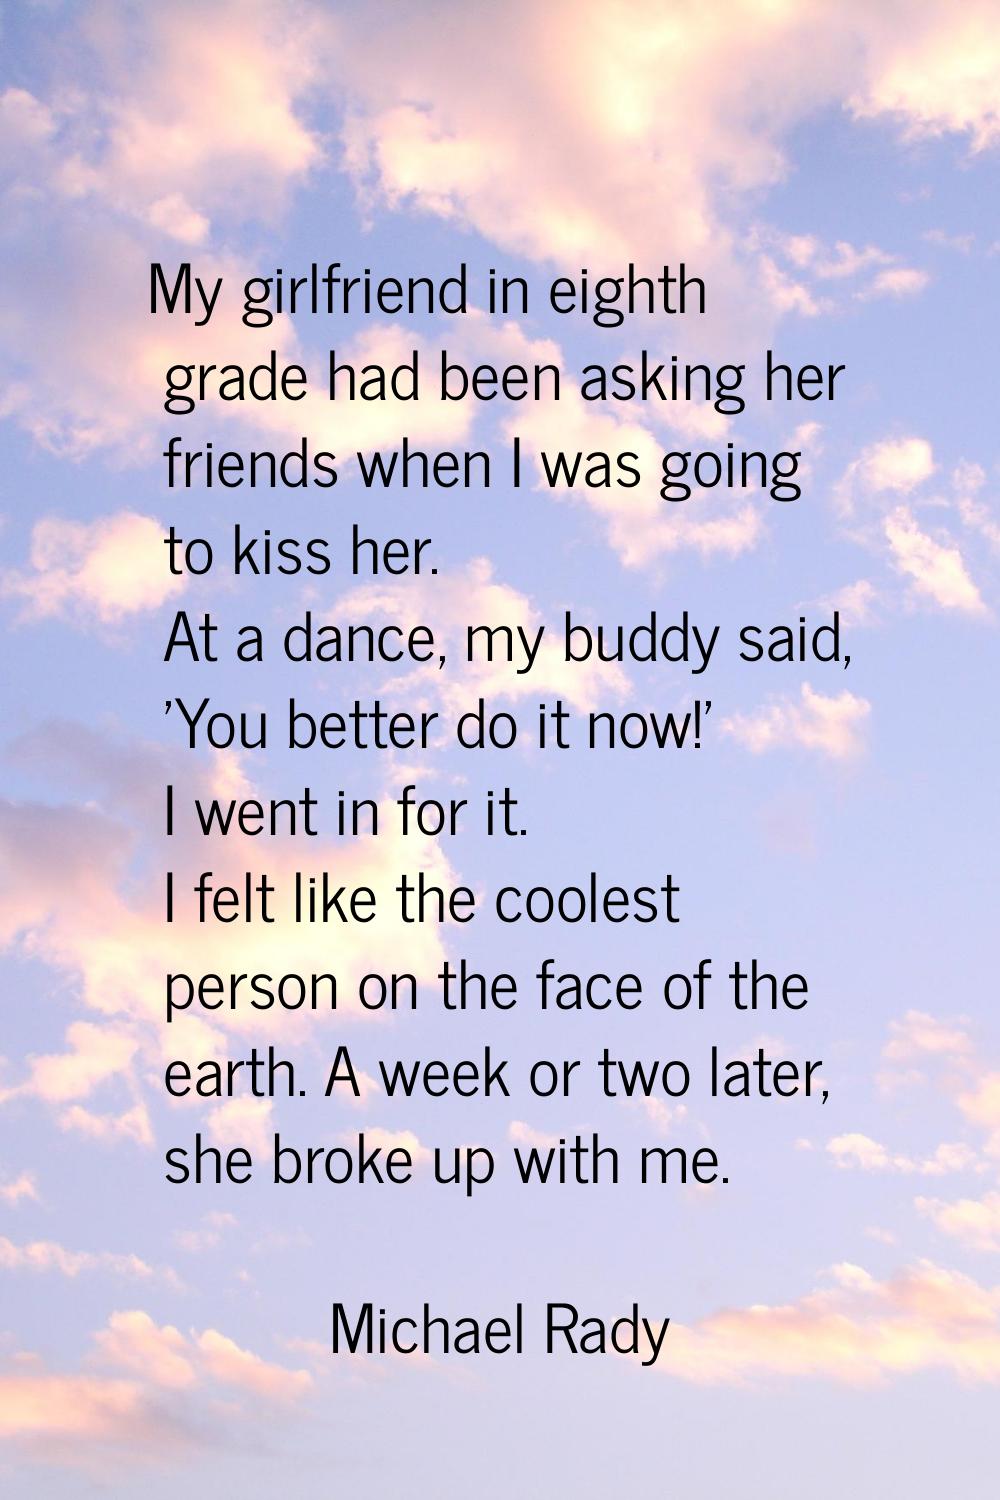 My girlfriend in eighth grade had been asking her friends when I was going to kiss her. At a dance,